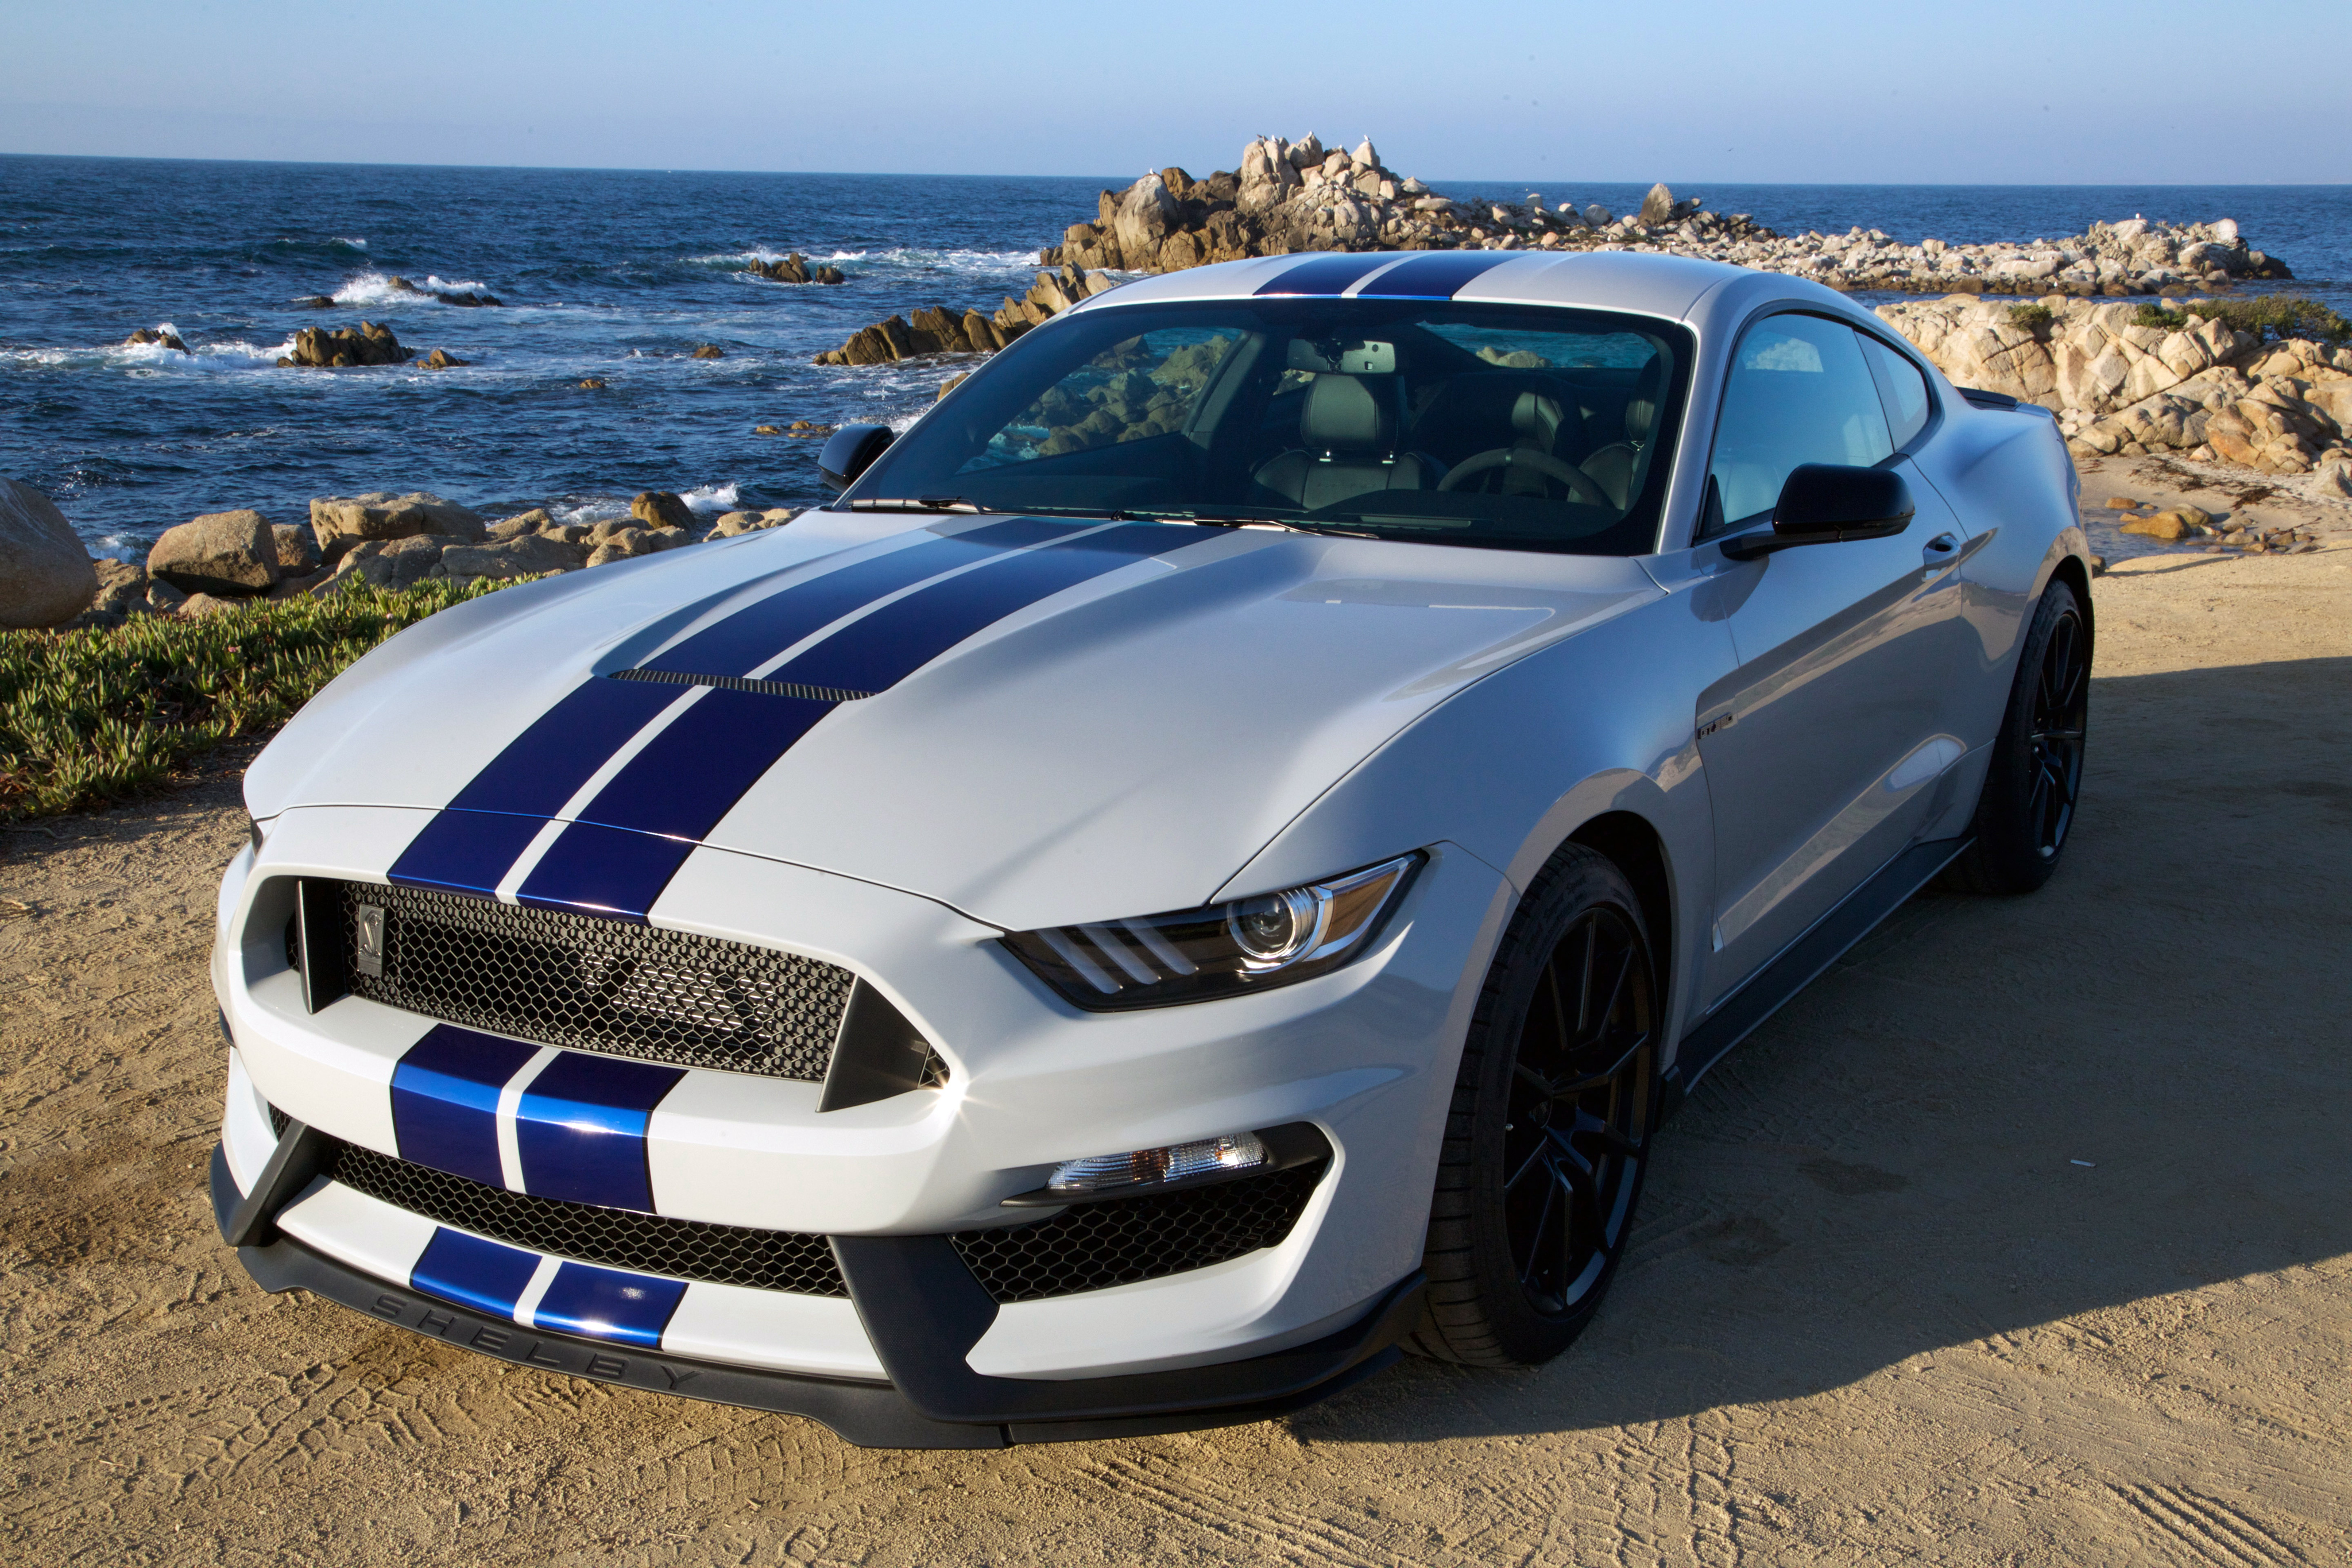 Ford Mustang Shelby GT350 Ford Mustang Ford Car Vehicle White Car Muscle Car 4096x2731